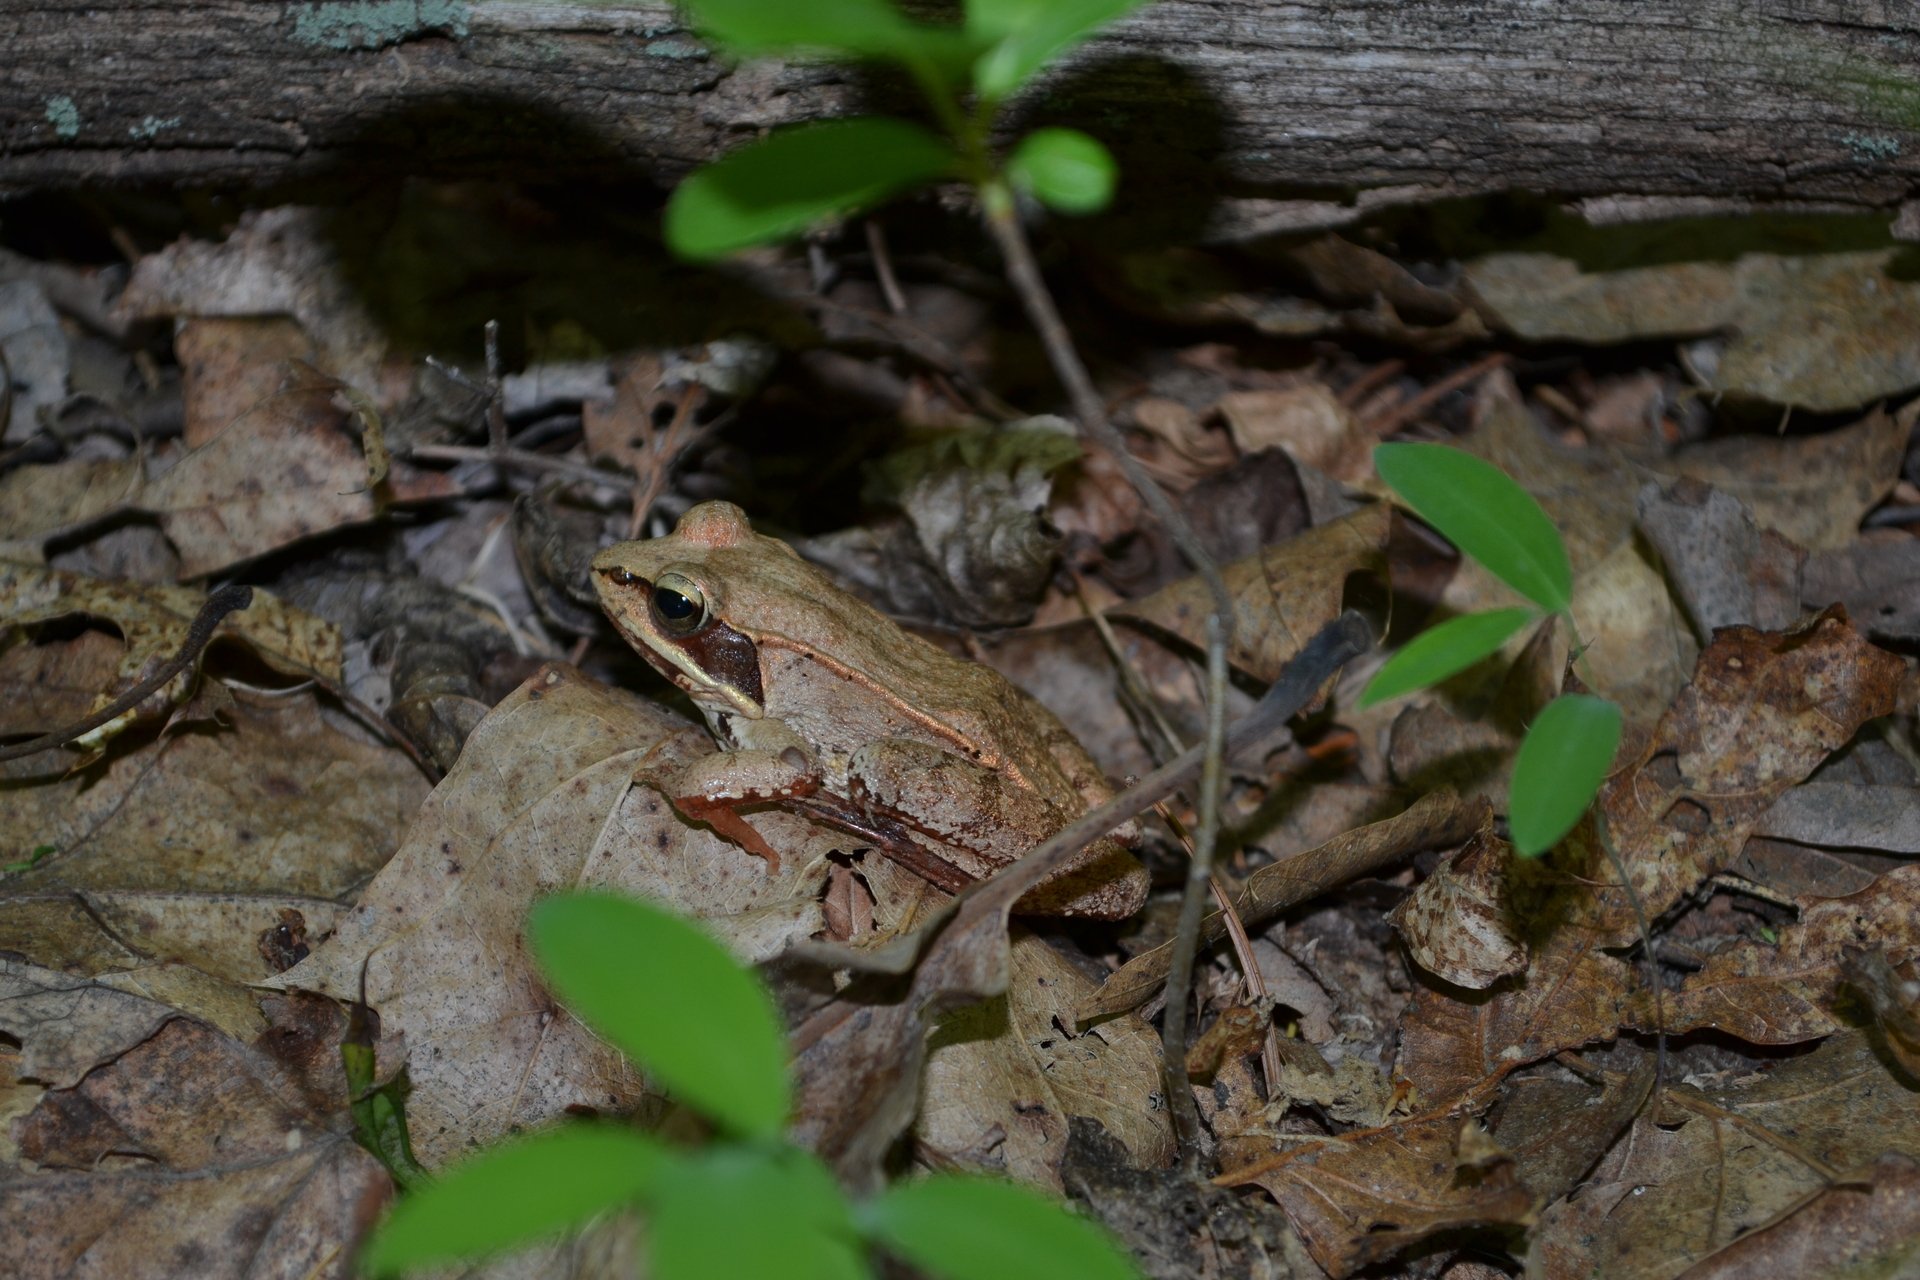 A brown frog camouflages into the forest floor with fallen leaves.